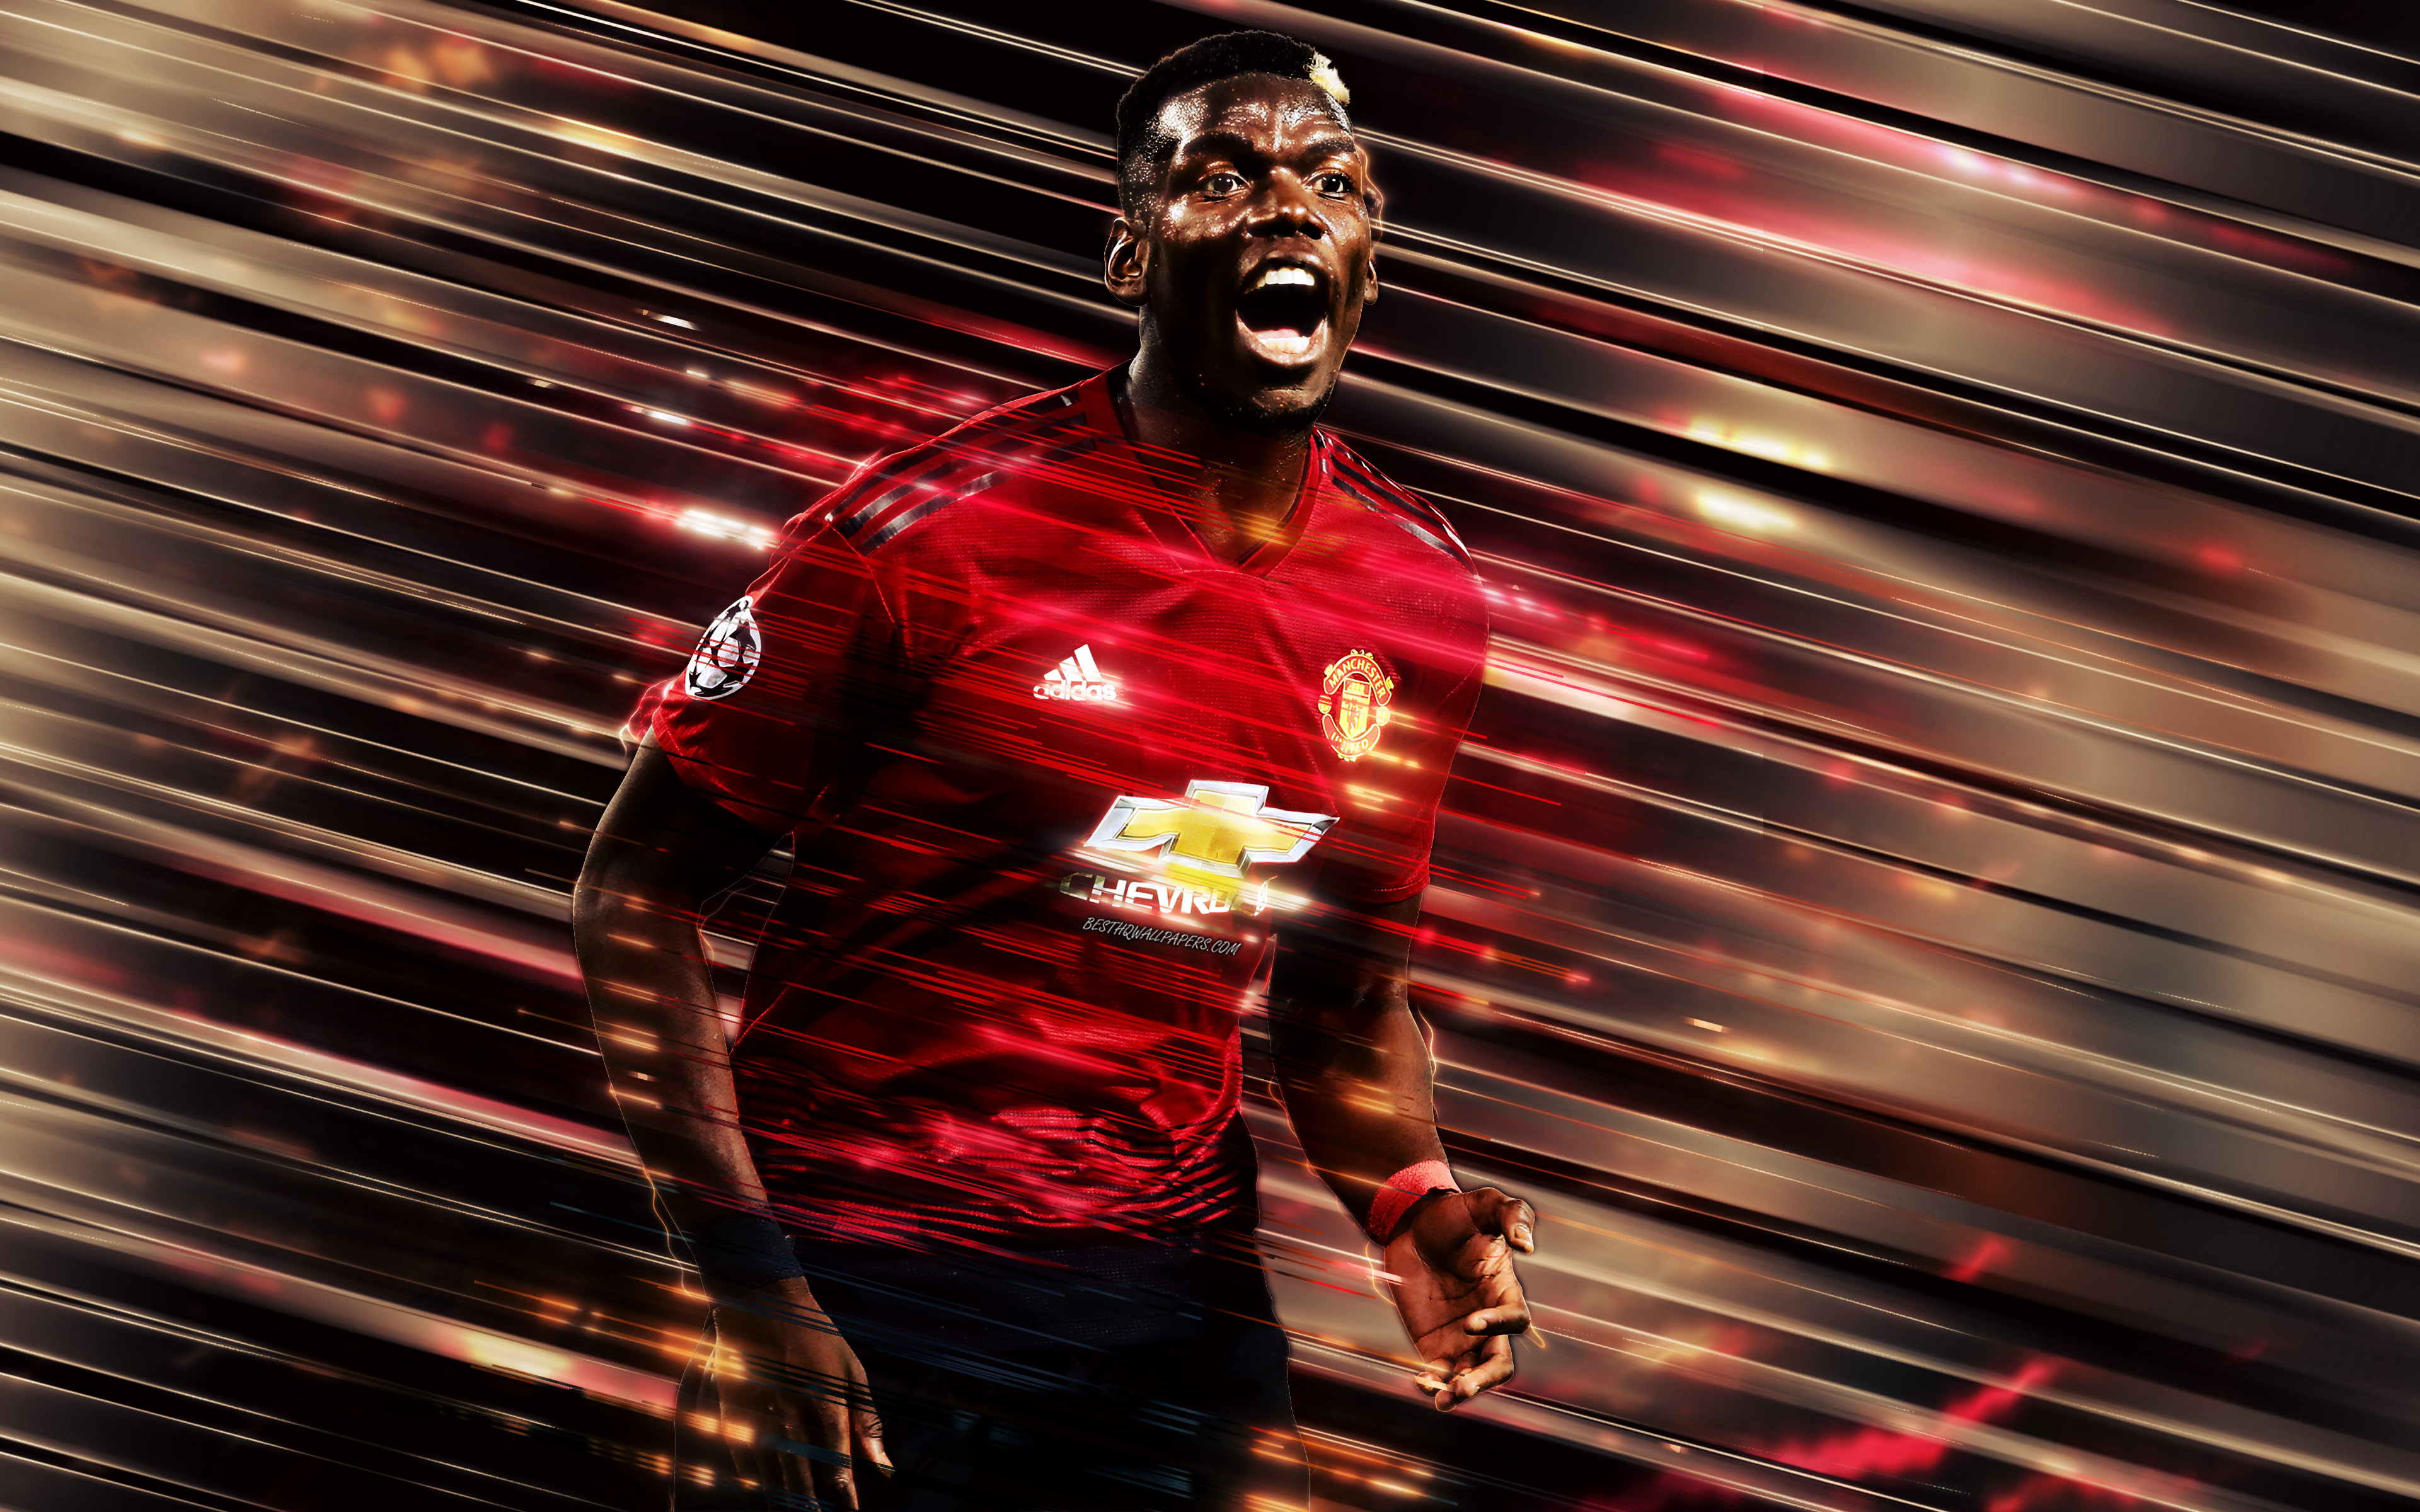 French Manchester United F C Paul Pogba Soccer 3840x2400